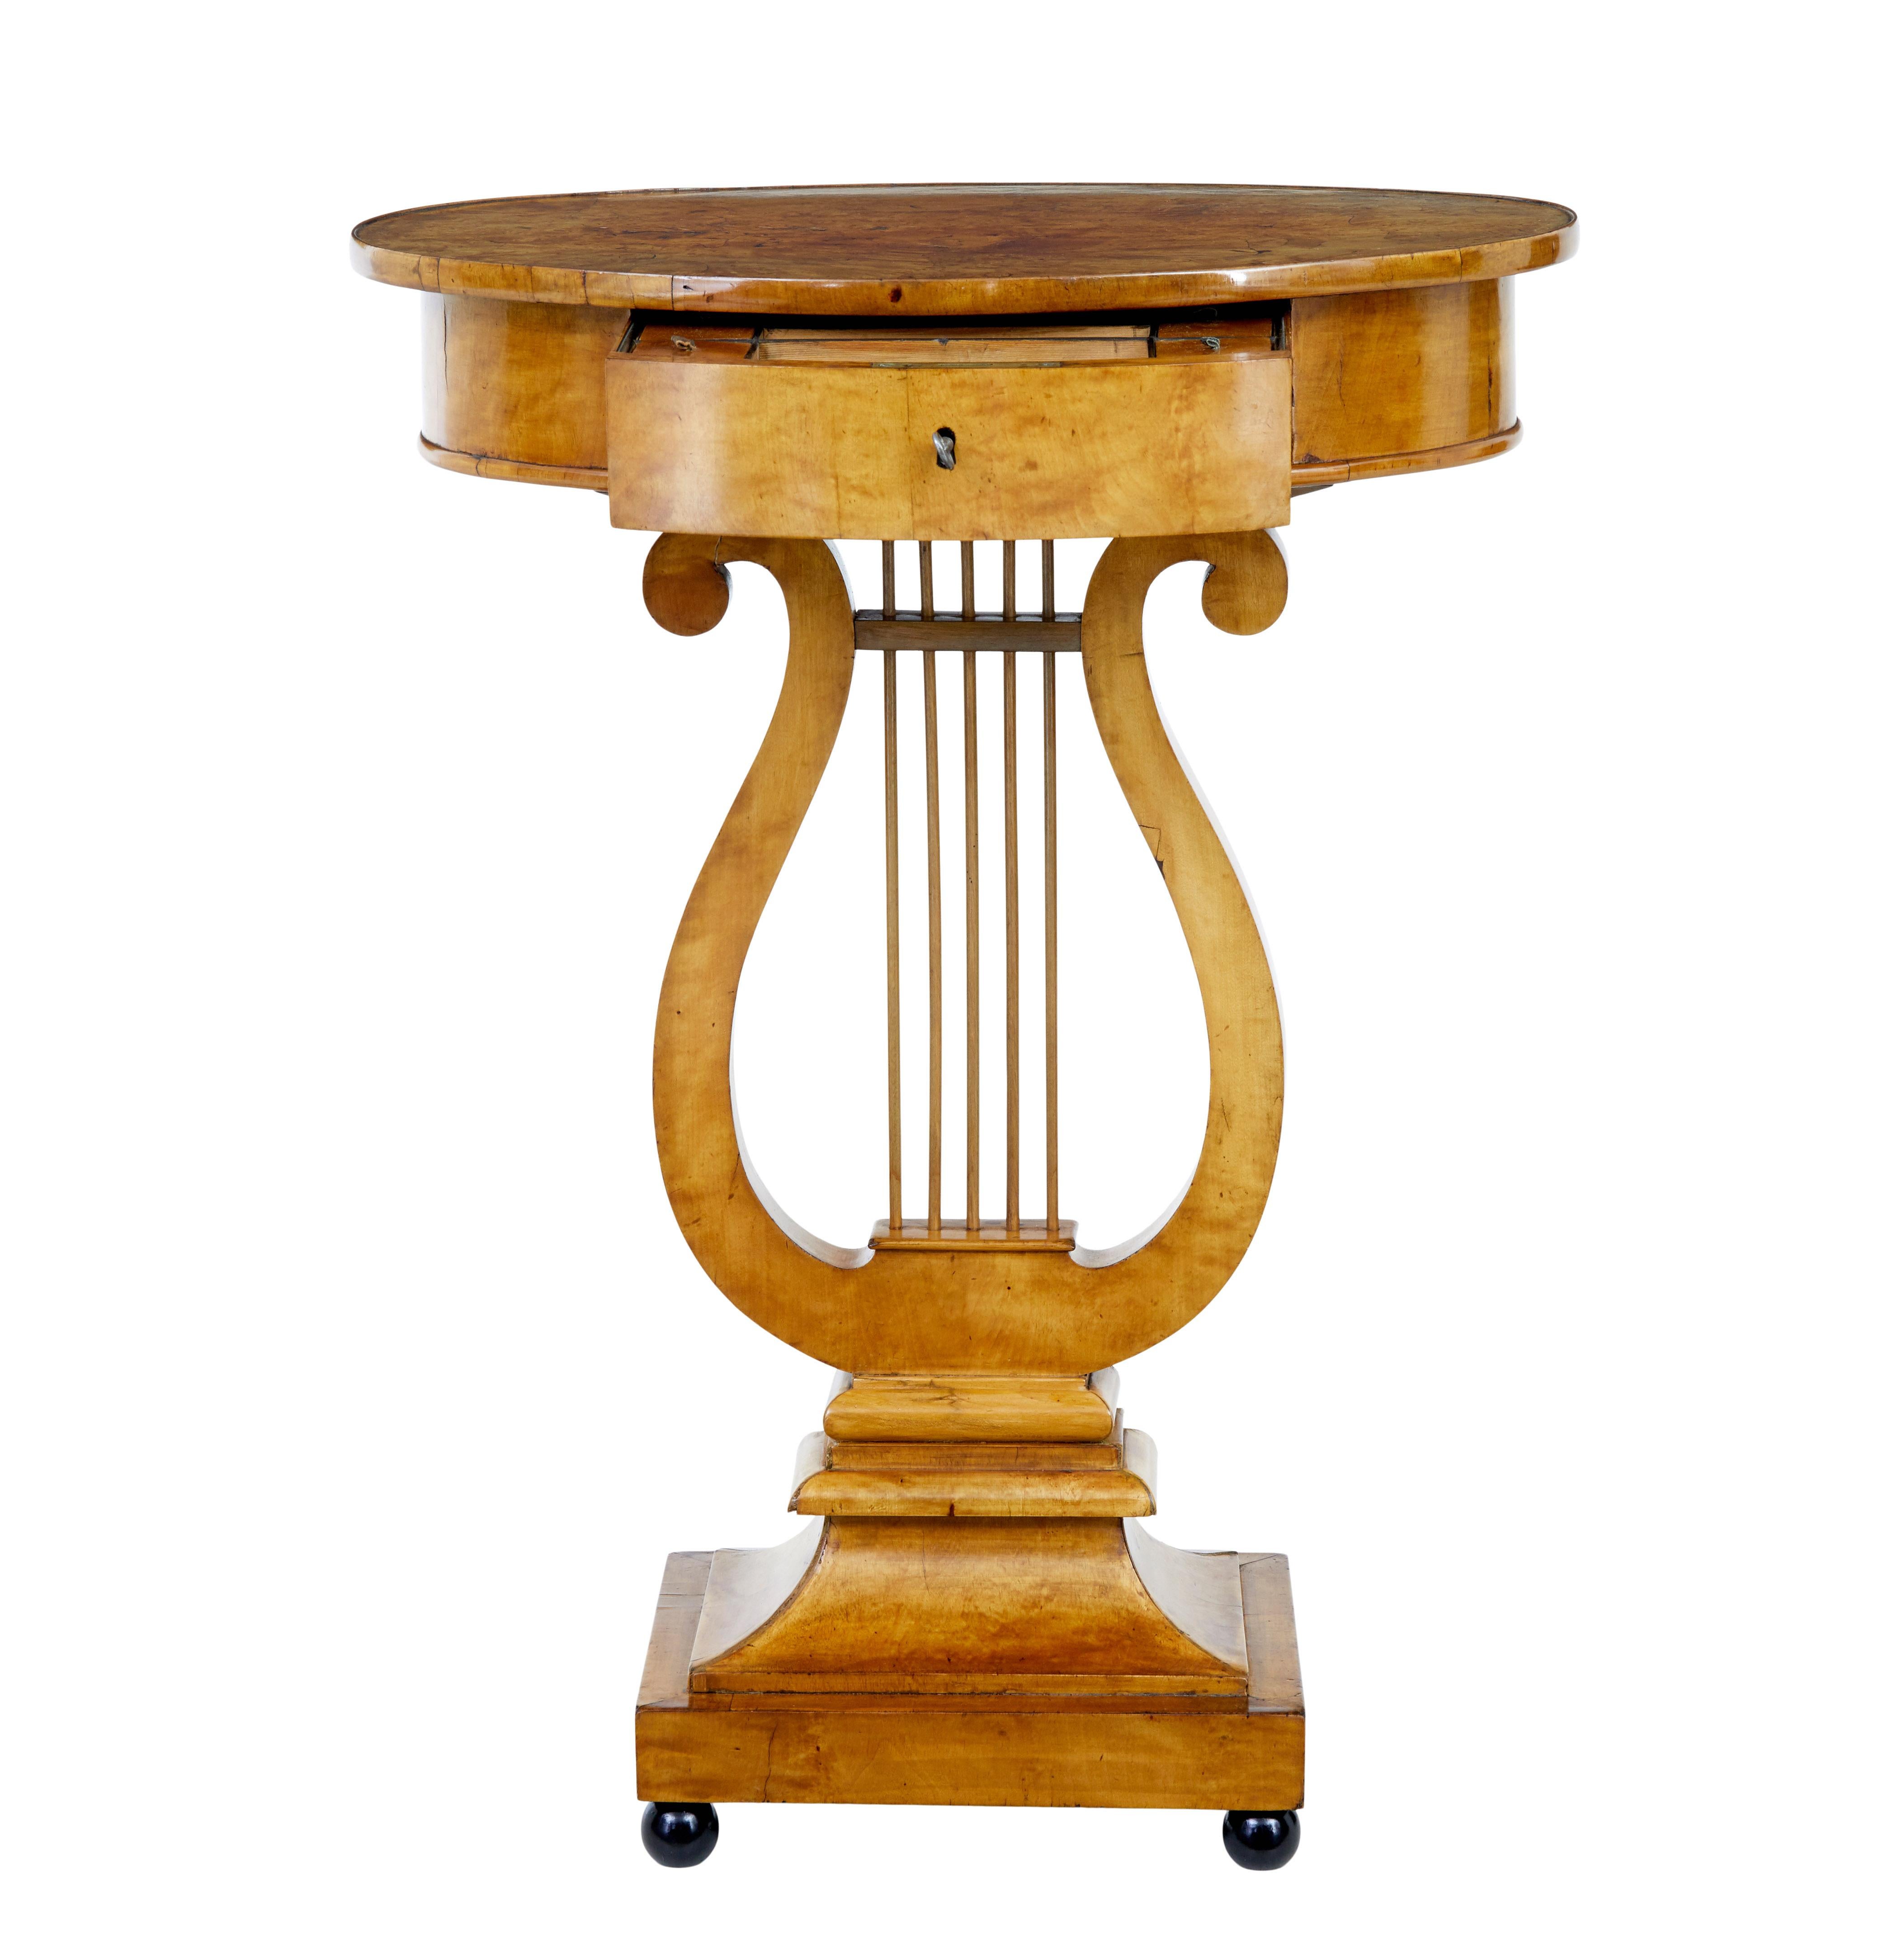 Early 19th century birch Empire lyre form side table circa 1820.

Fine quality Swedish Empire period birch side table.

Oval top, veneered in burr birch complete with original moulded edge. Single drawer to the front with working lock and key,